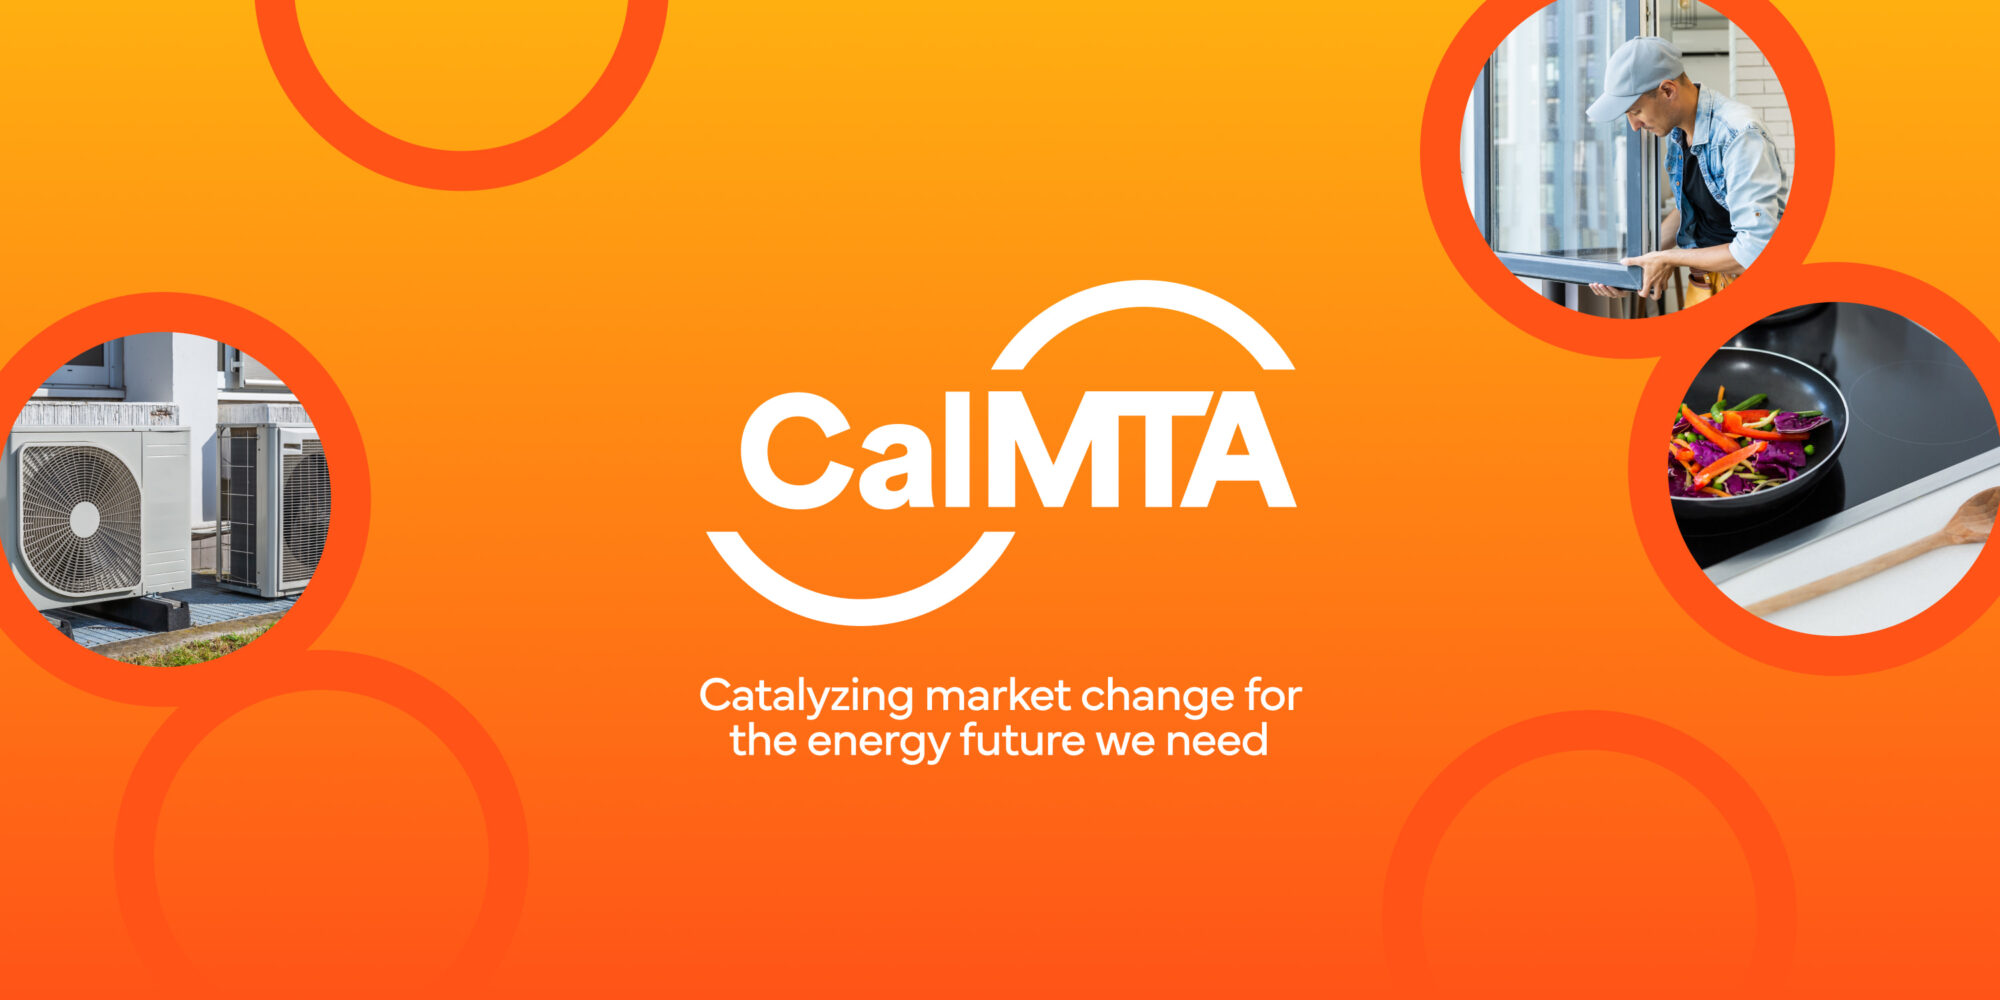 Hero image showing the CalMTA logo, a circle pattern, and images outlining areas of focus.